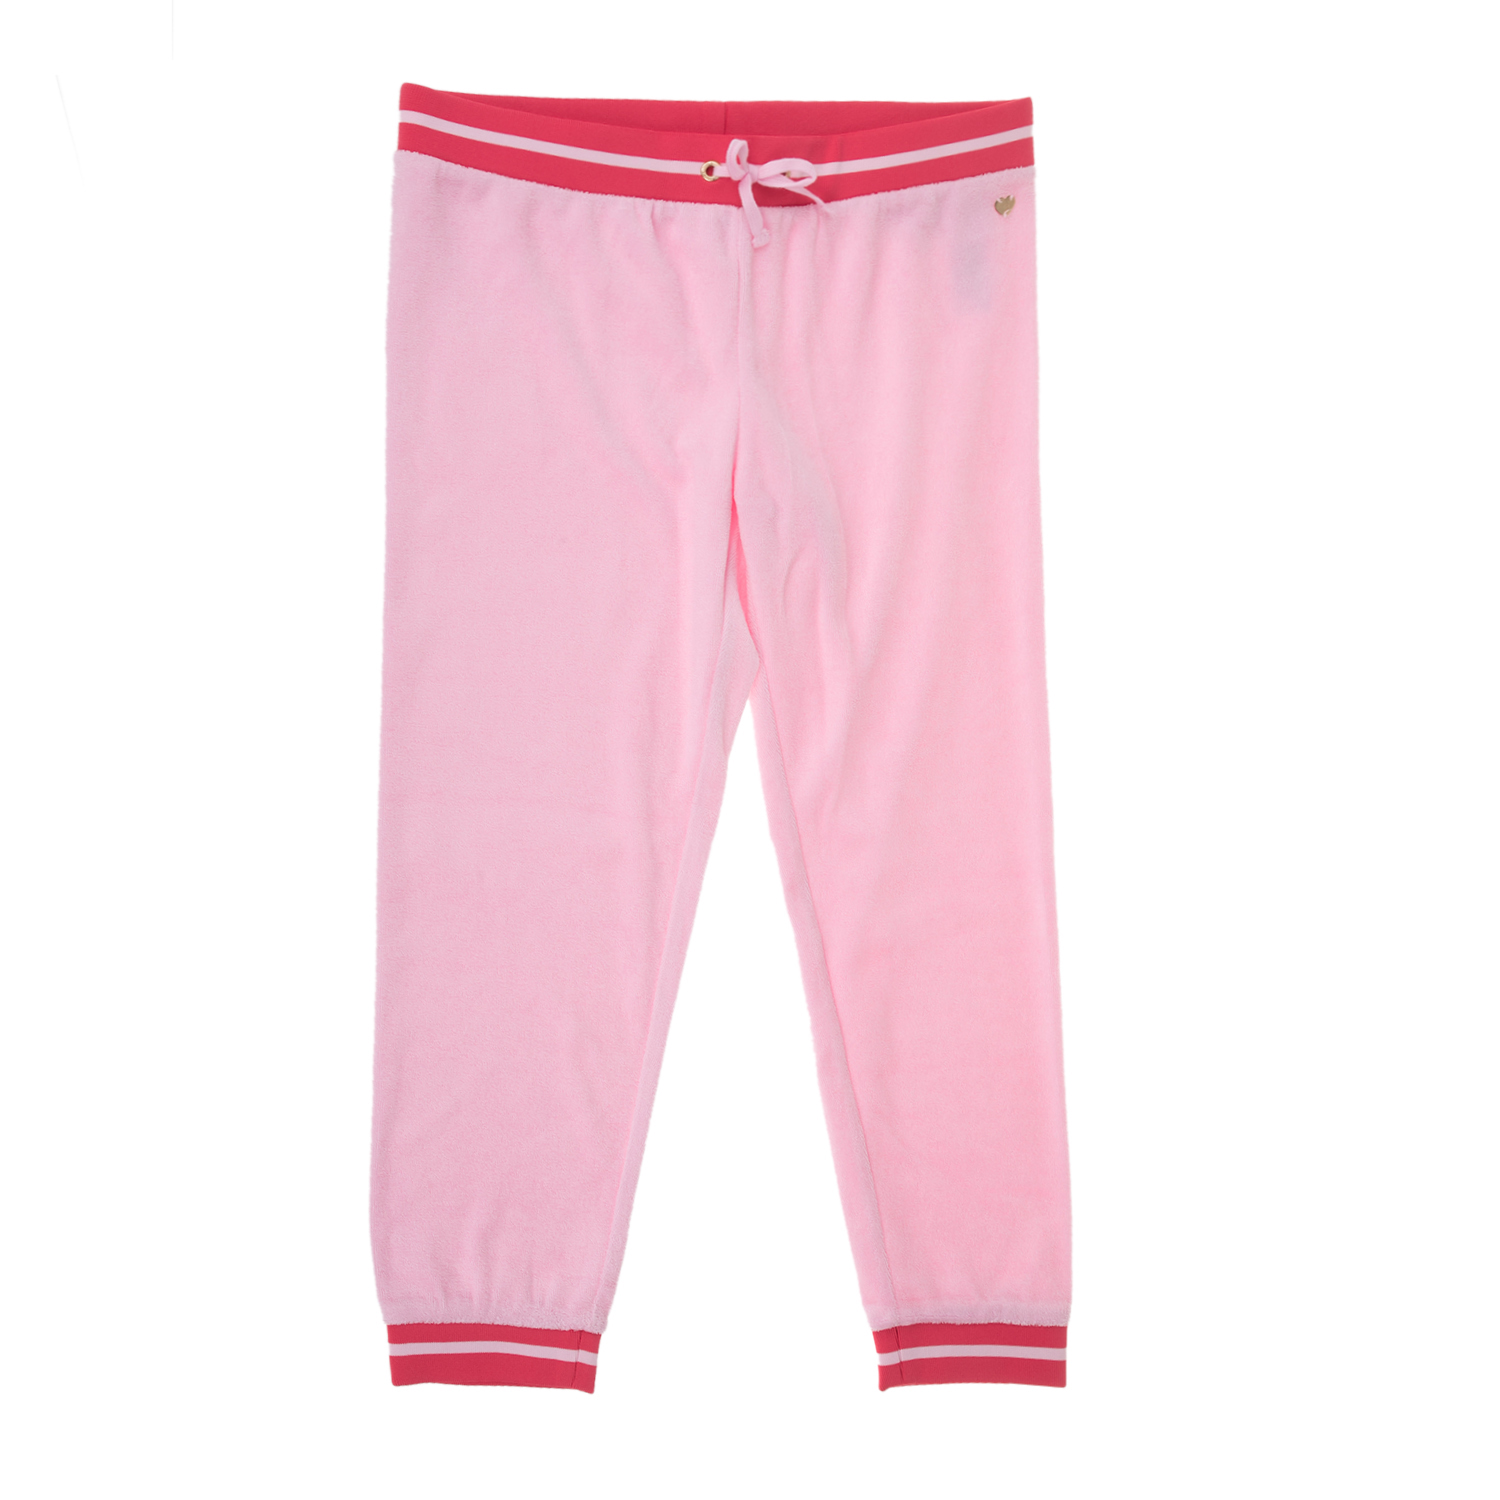 JUICY COUTURE KIDS Κοριτσίστικο παντελόνι φόρμας JUICY COUTURE MICROTERRY LA SUNSET ροζ